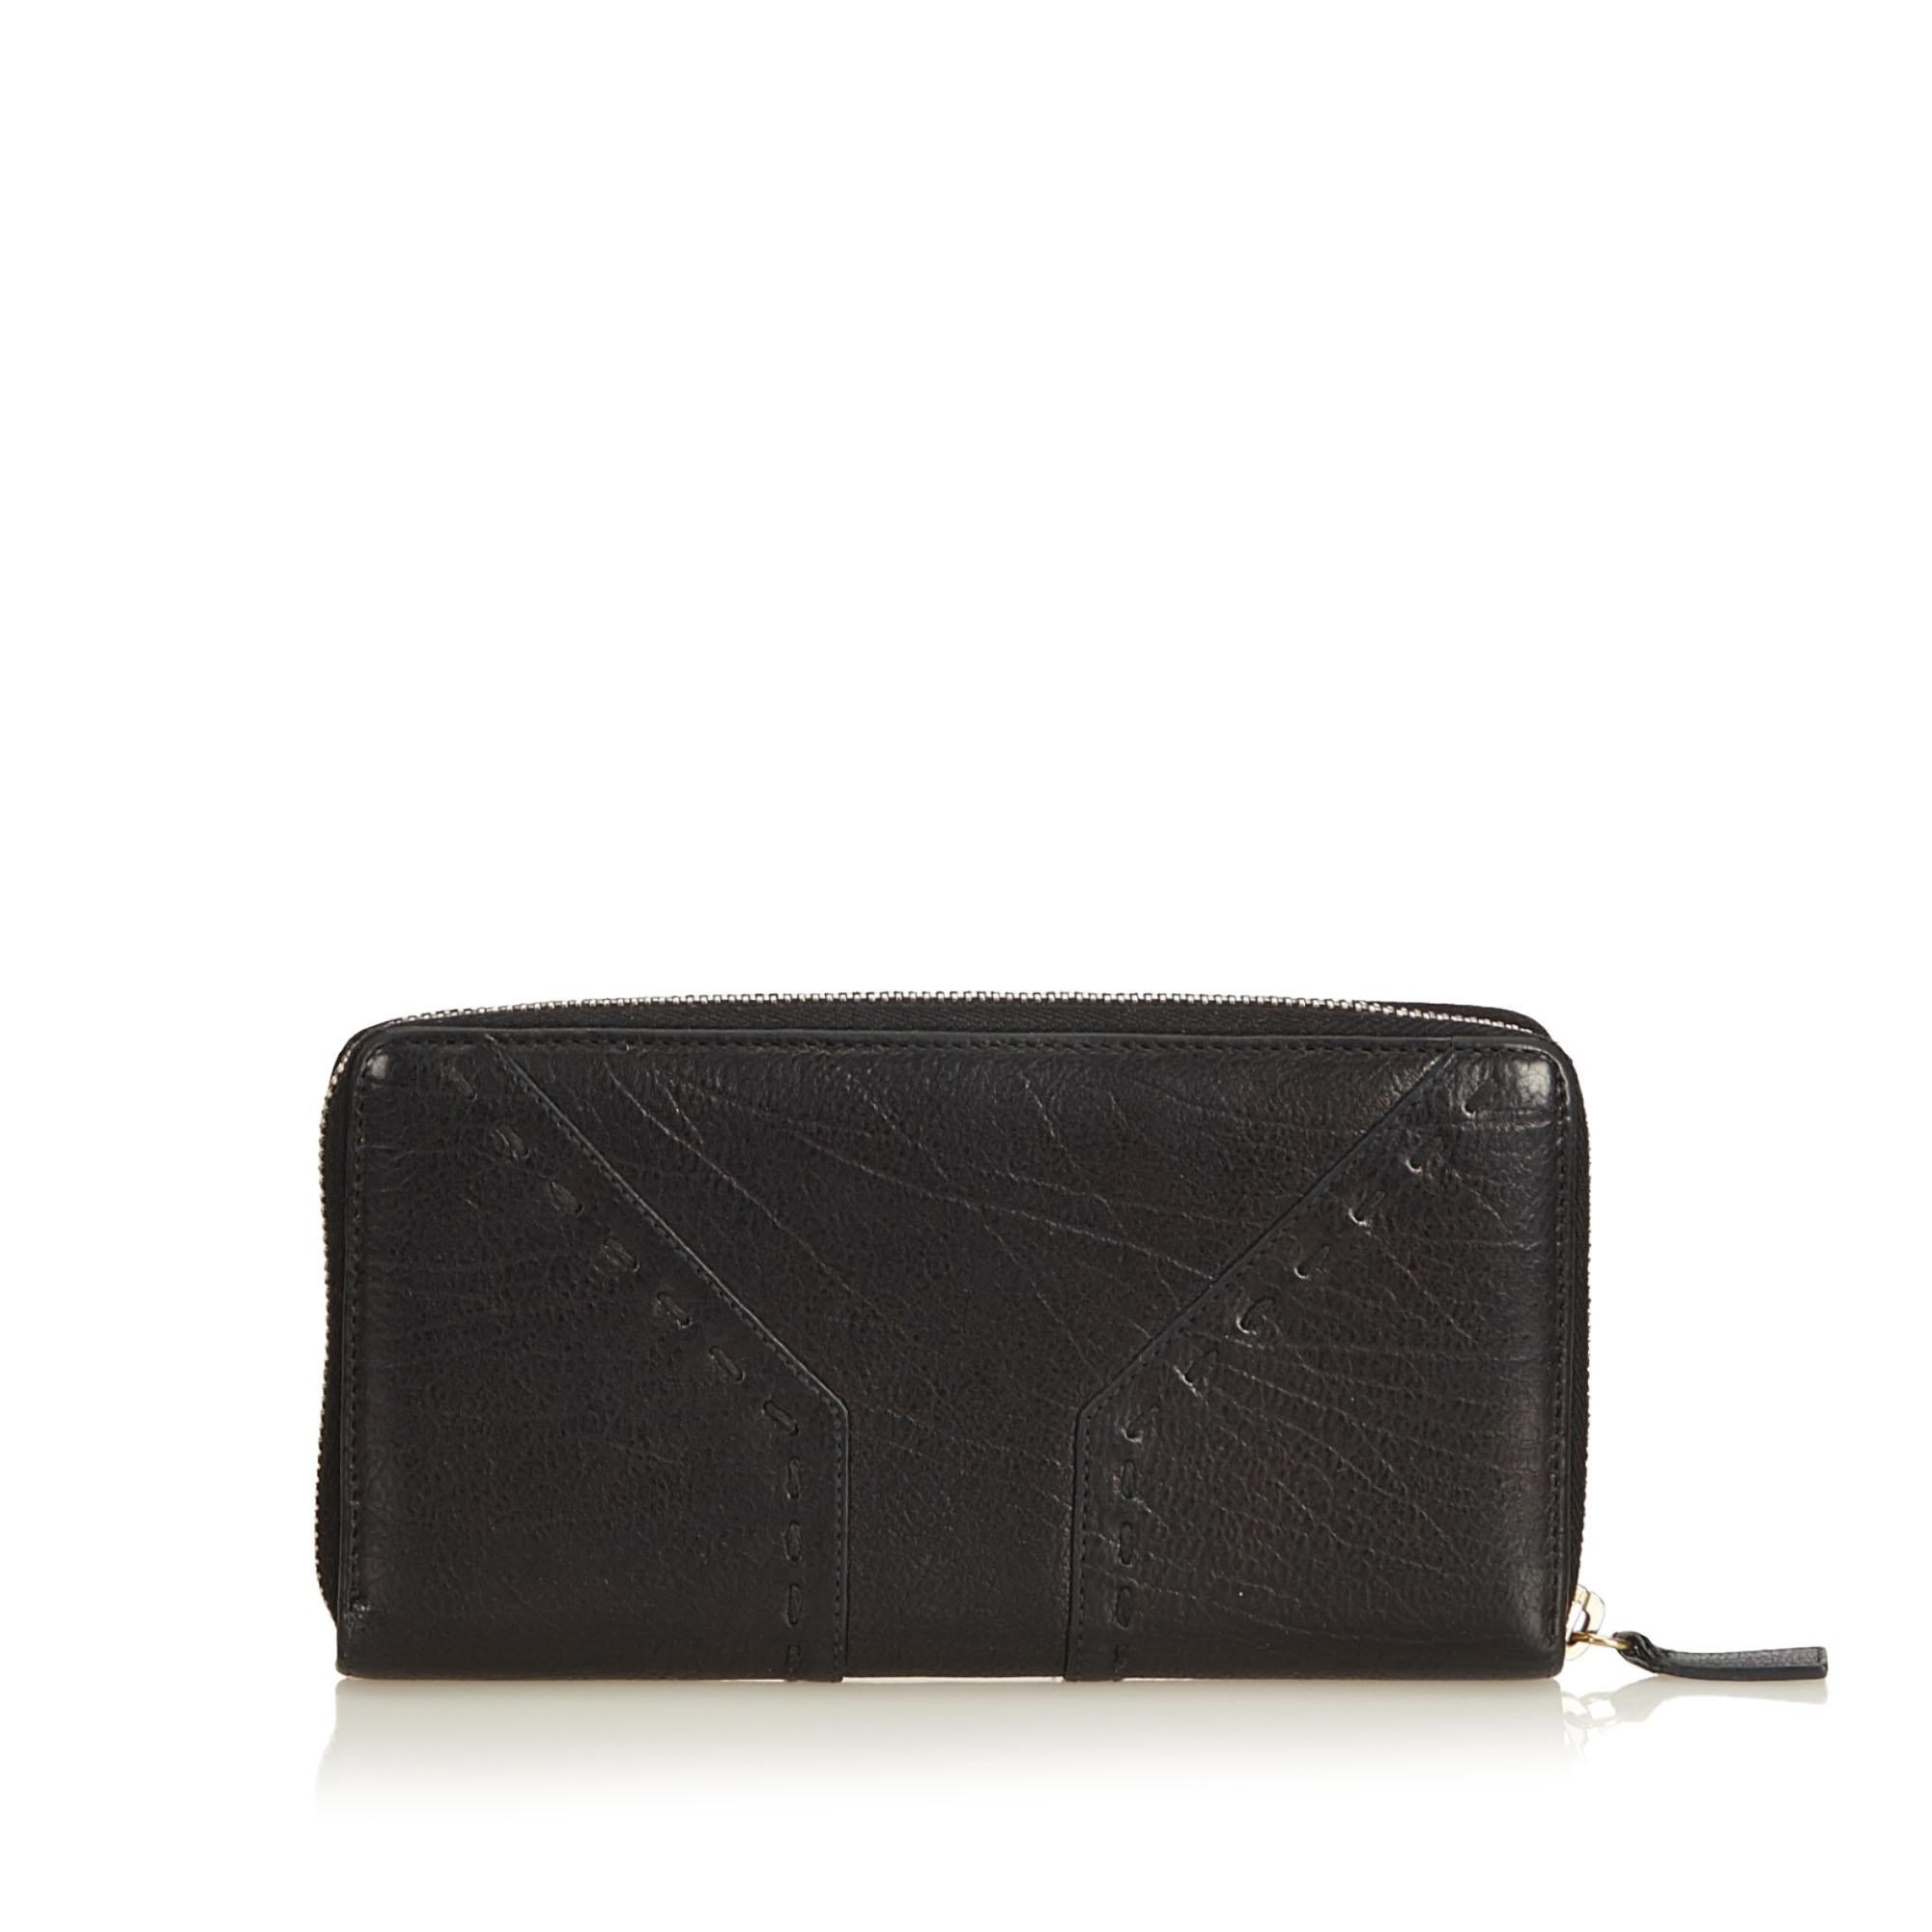 YSL Black Others Leather Muse Wallet France In Good Condition For Sale In Orlando, FL